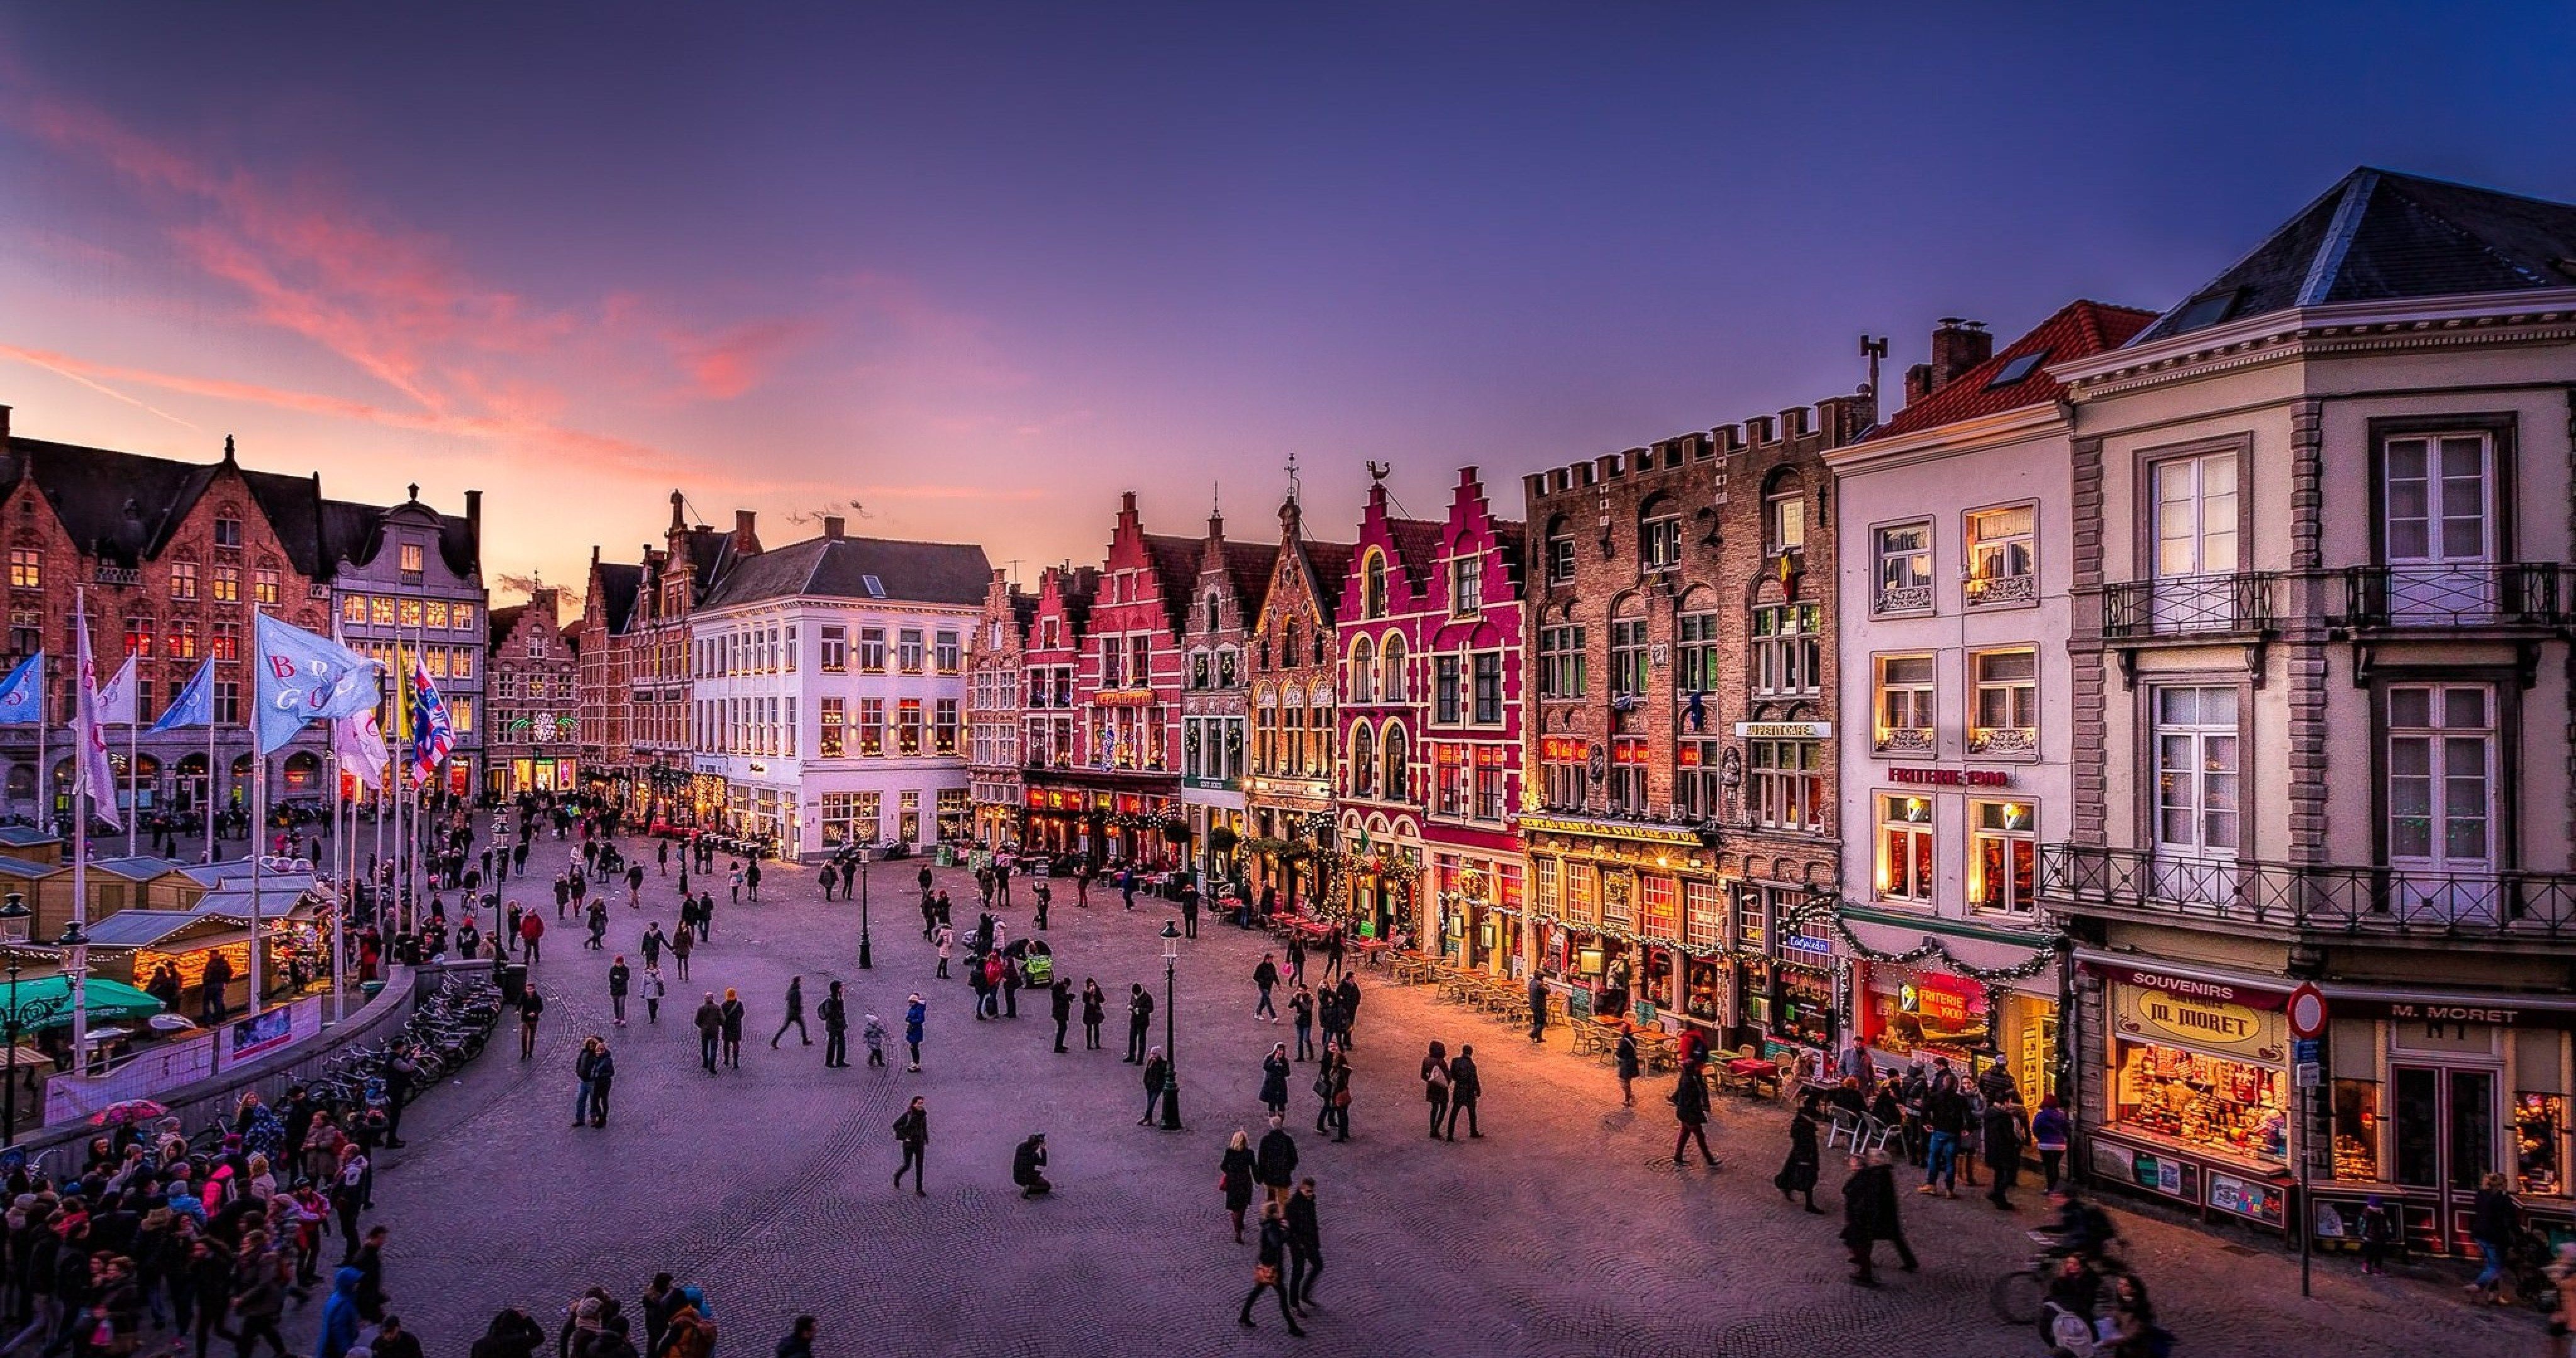 Wallpaper Blink of Bruges Wallpaper HD for Android, Windows